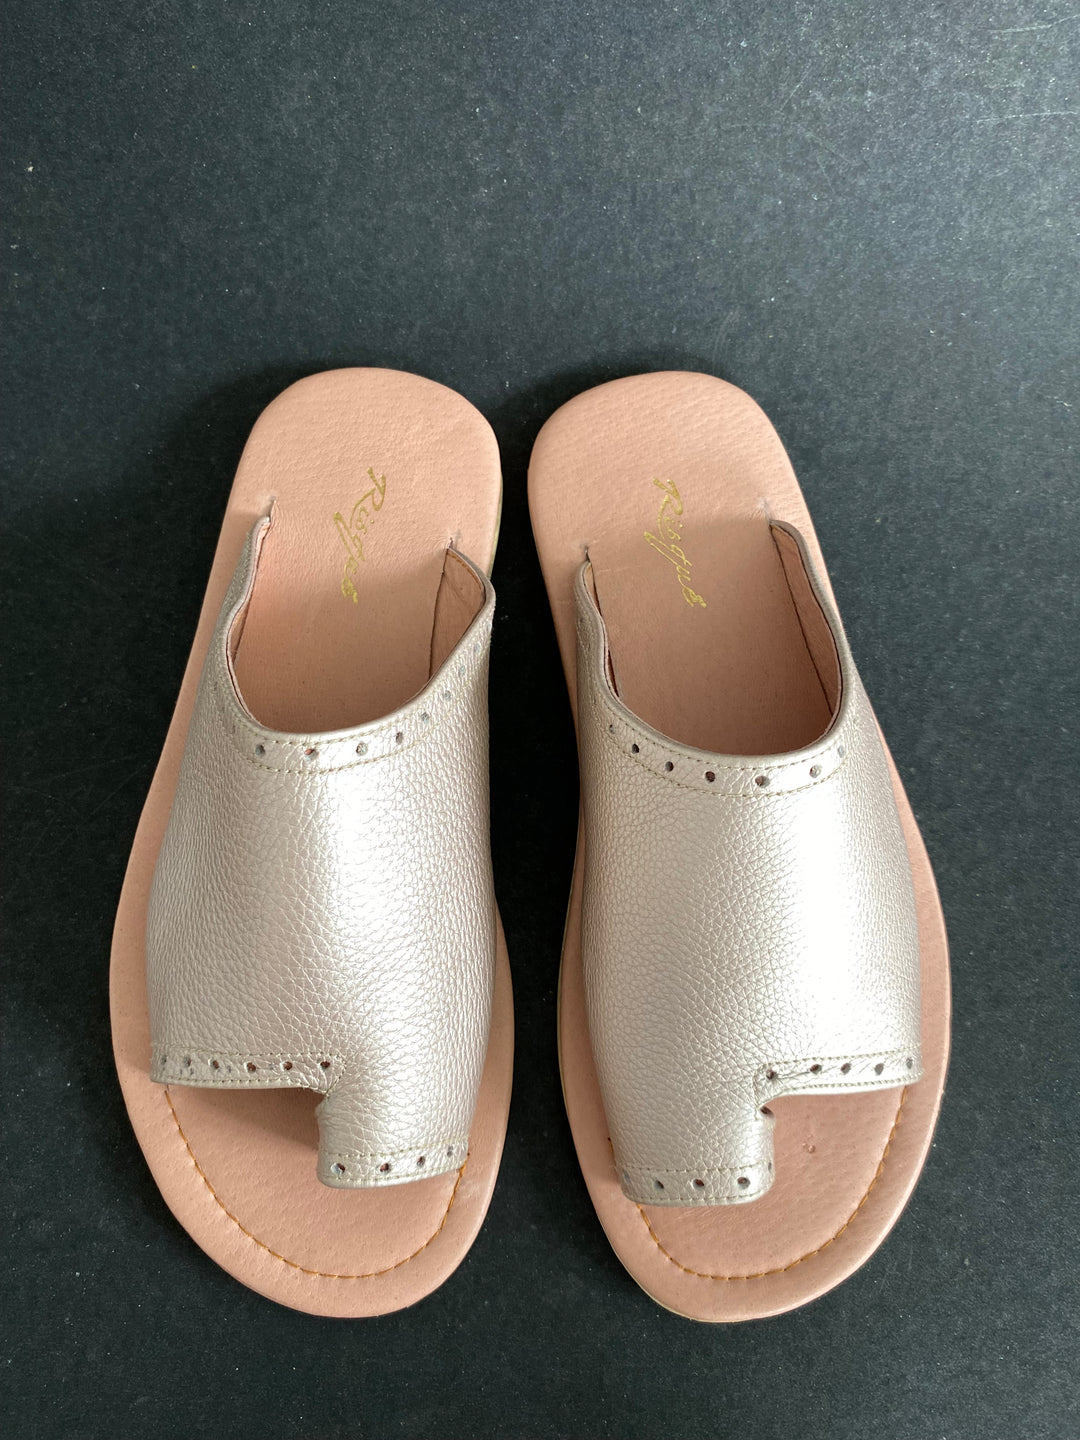 Risqué Designs Womens Genuine Leather Slides in Rosegold